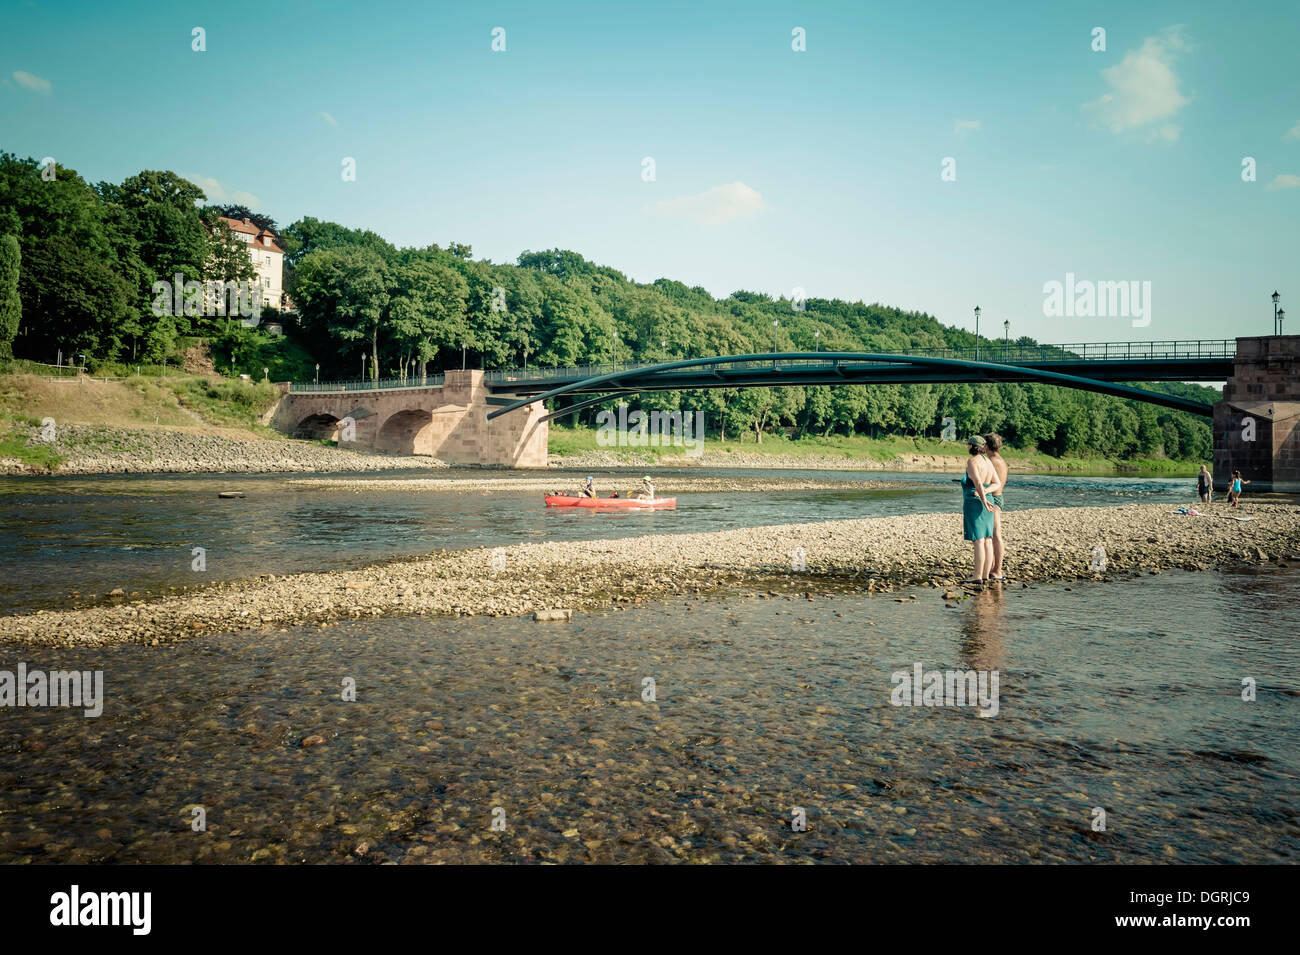 Germany, Saxony, Grimma, Poppelmann Bridge with people at Mulde Stock Photo